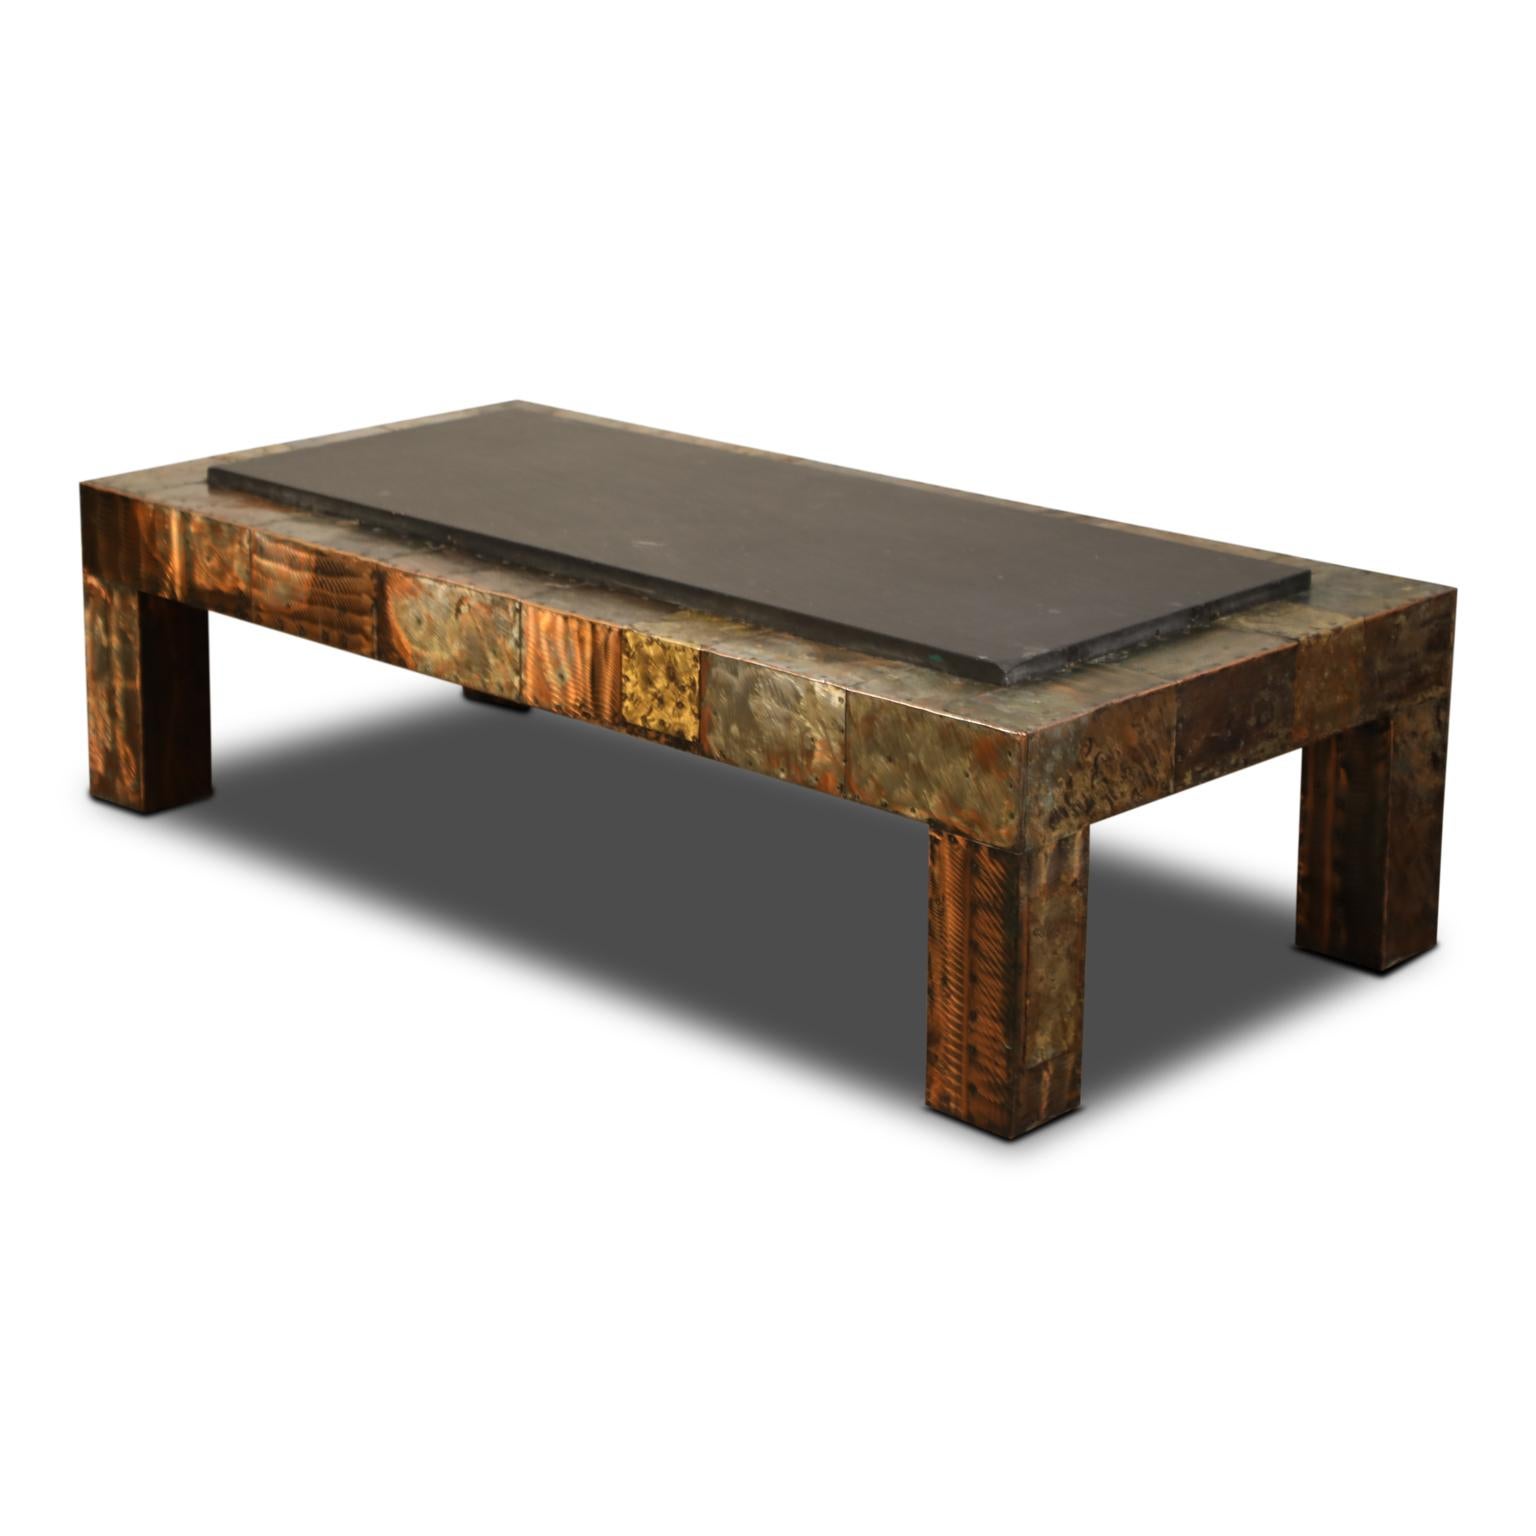 American Paul Evans for Directional Patchwork Copper Coffee Table with Slate Top, 1970s